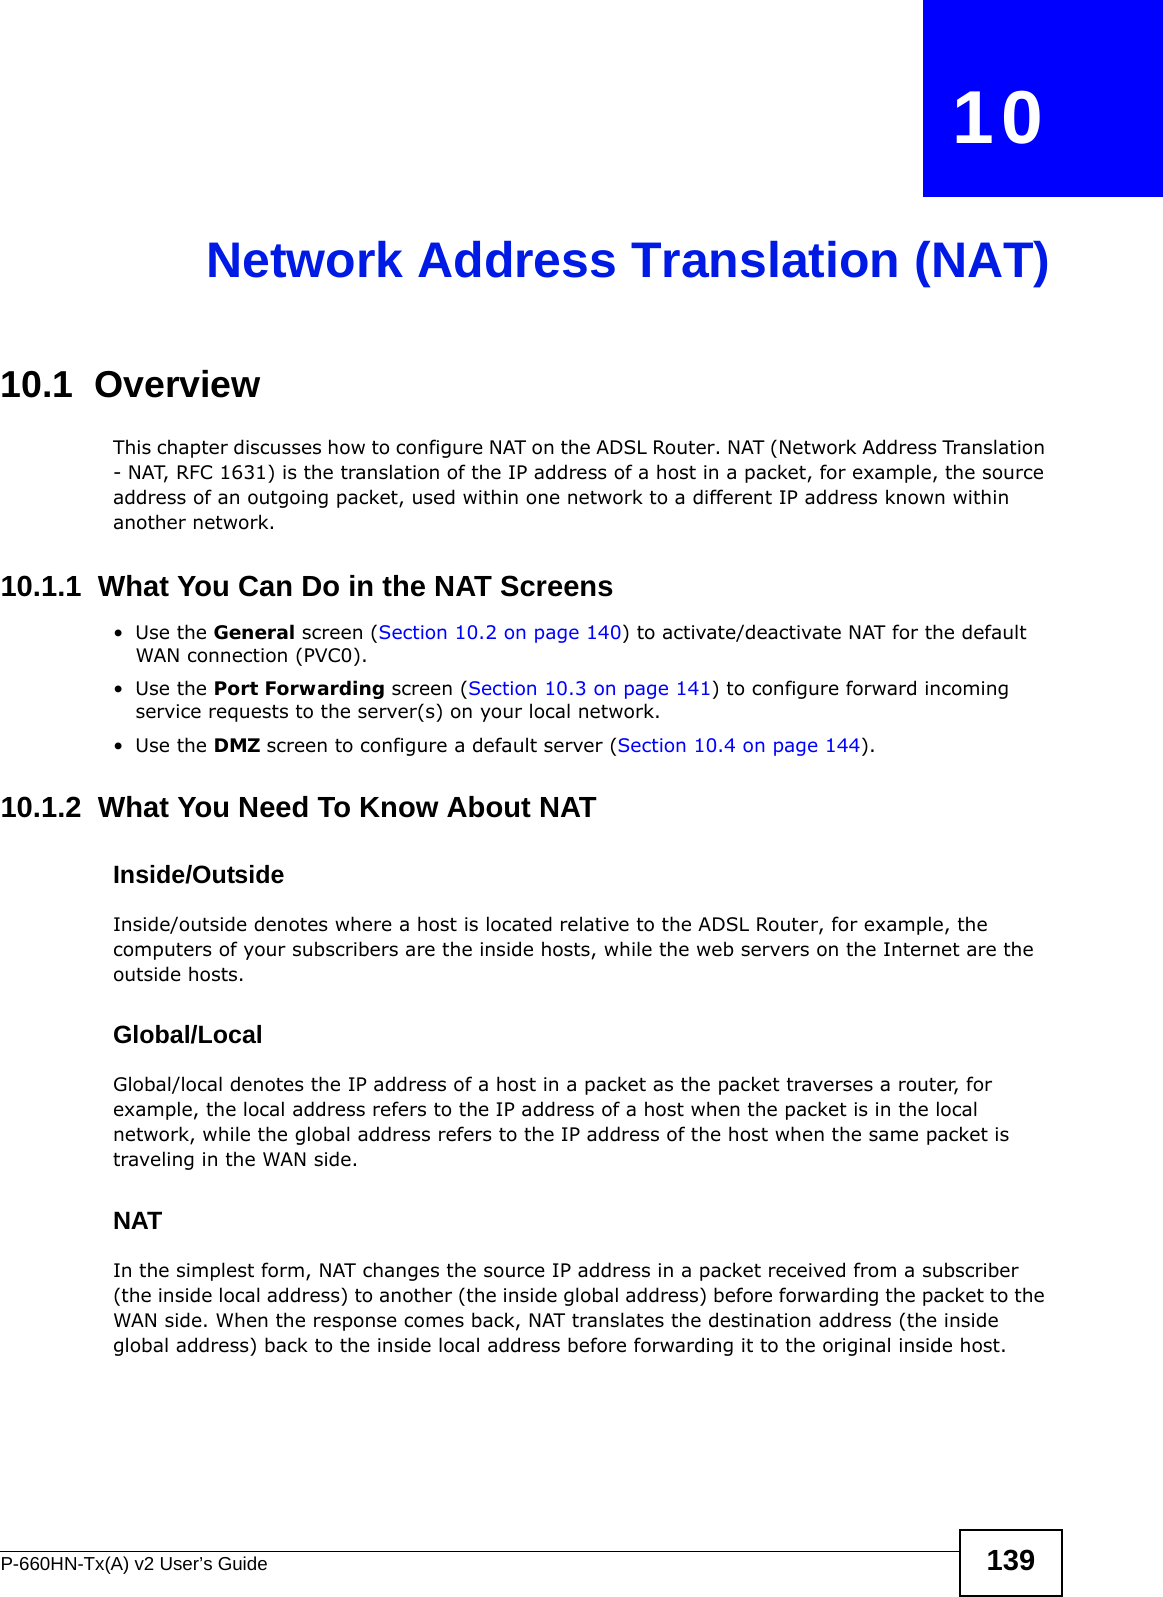 P-660HN-Tx(A) v2 User’s Guide 139CHAPTER   10Network Address Translation (NAT)10.1  OverviewThis chapter discusses how to configure NAT on the ADSL Router. NAT (Network Address Translation - NAT, RFC 1631) is the translation of the IP address of a host in a packet, for example, the source address of an outgoing packet, used within one network to a different IP address known within another network.10.1.1  What You Can Do in the NAT Screens•Use the General screen (Section 10.2 on page 140) to activate/deactivate NAT for the default WAN connection (PVC0).•Use the Port Forwarding screen (Section 10.3 on page 141) to configure forward incoming service requests to the server(s) on your local network. •Use the DMZ screen to configure a default server (Section 10.4 on page 144).10.1.2  What You Need To Know About NATInside/OutsideInside/outside denotes where a host is located relative to the ADSL Router, for example, the computers of your subscribers are the inside hosts, while the web servers on the Internet are the outside hosts. Global/LocalGlobal/local denotes the IP address of a host in a packet as the packet traverses a router, for example, the local address refers to the IP address of a host when the packet is in the local network, while the global address refers to the IP address of the host when the same packet is traveling in the WAN side. NATIn the simplest form, NAT changes the source IP address in a packet received from a subscriber (the inside local address) to another (the inside global address) before forwarding the packet to the WAN side. When the response comes back, NAT translates the destination address (the inside global address) back to the inside local address before forwarding it to the original inside host.